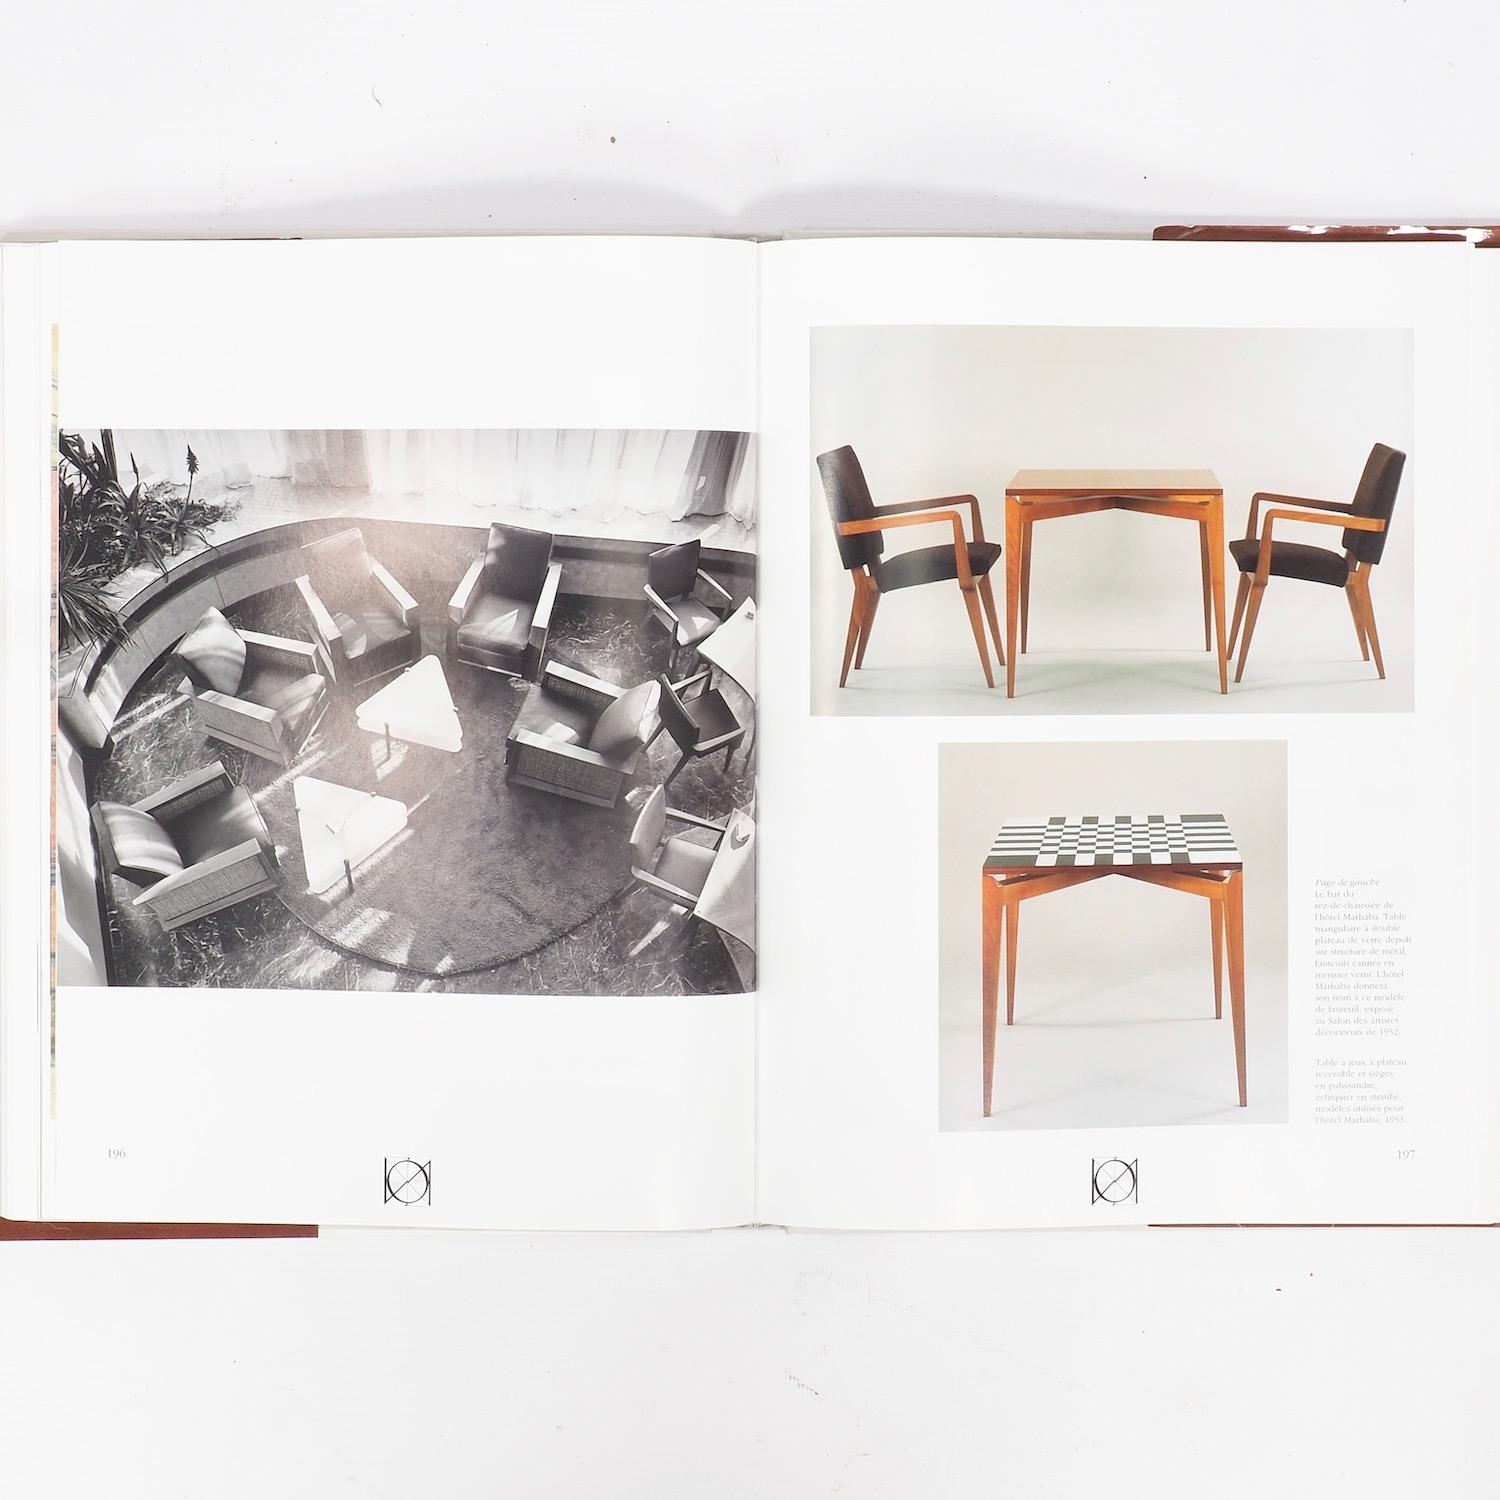 Maxime Old Architecte-Decorateur. Published by Norma Editions, Paris, 2000.

Maxime Old was one of the leading furniture makers and designers in France from the mid-1930s-the 1980s. He was born into a long line of cabinet makers and as a young man